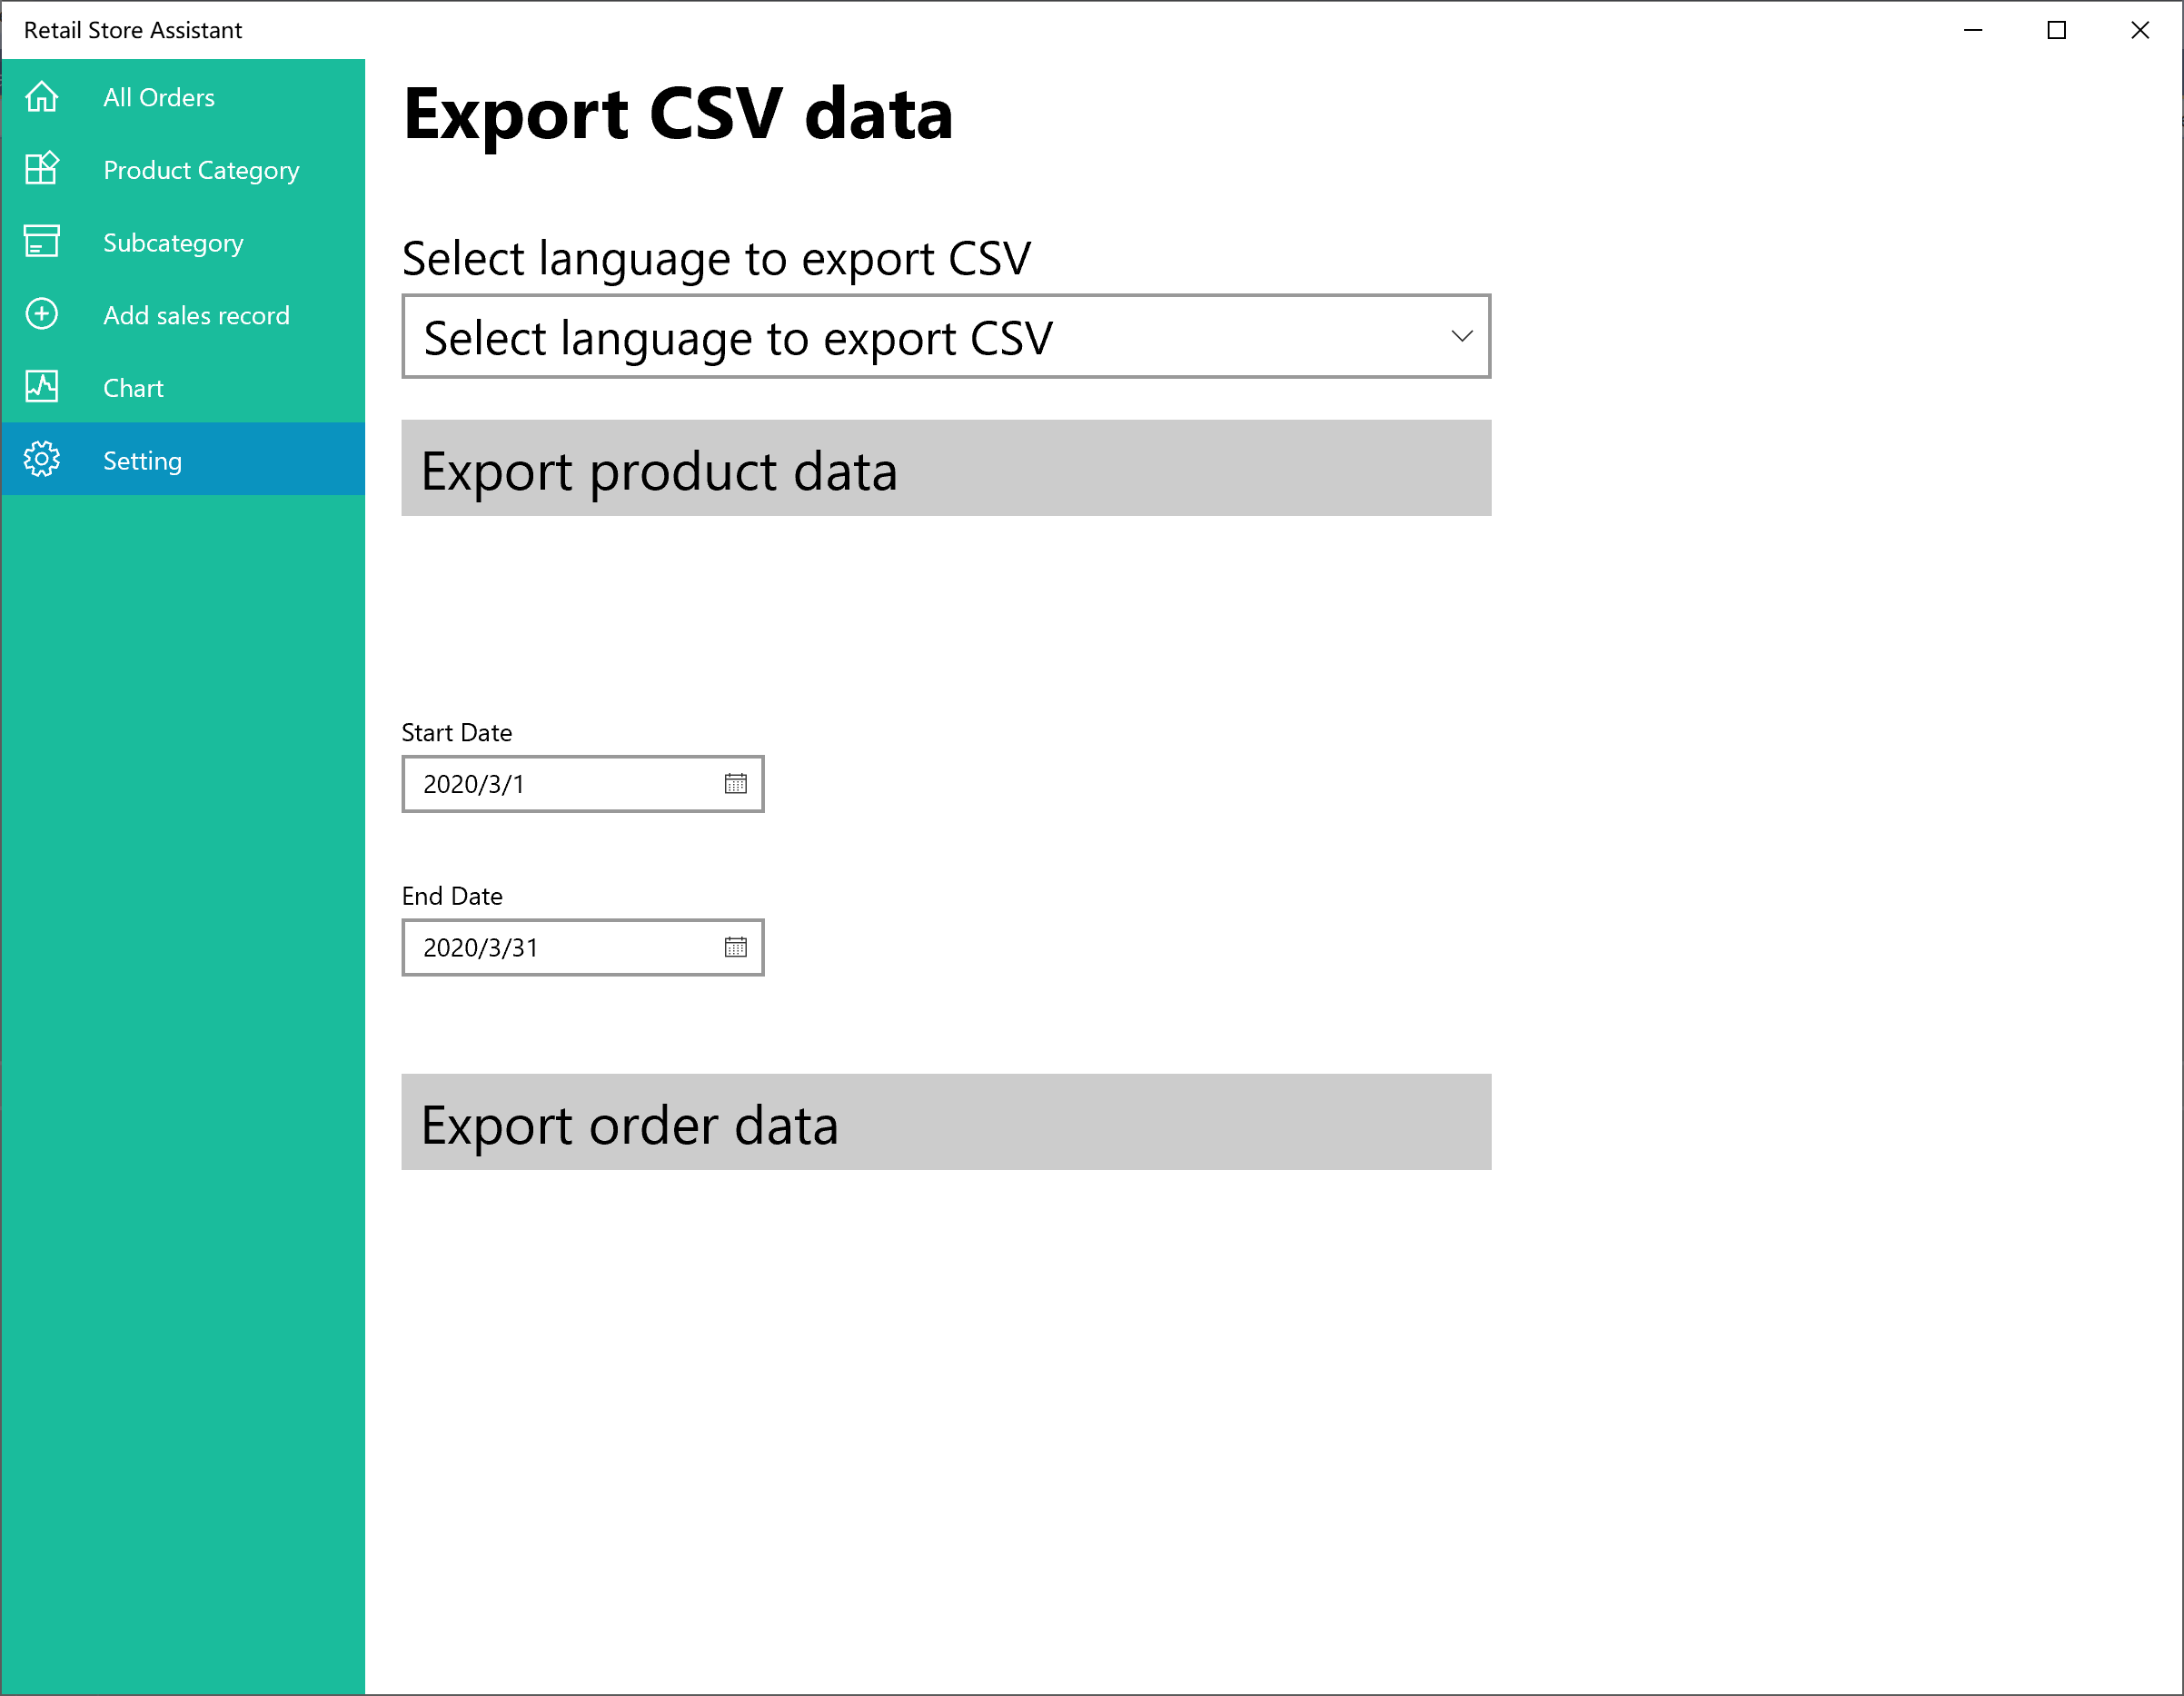 Export data of product information and order information, which can be edited using Excel.